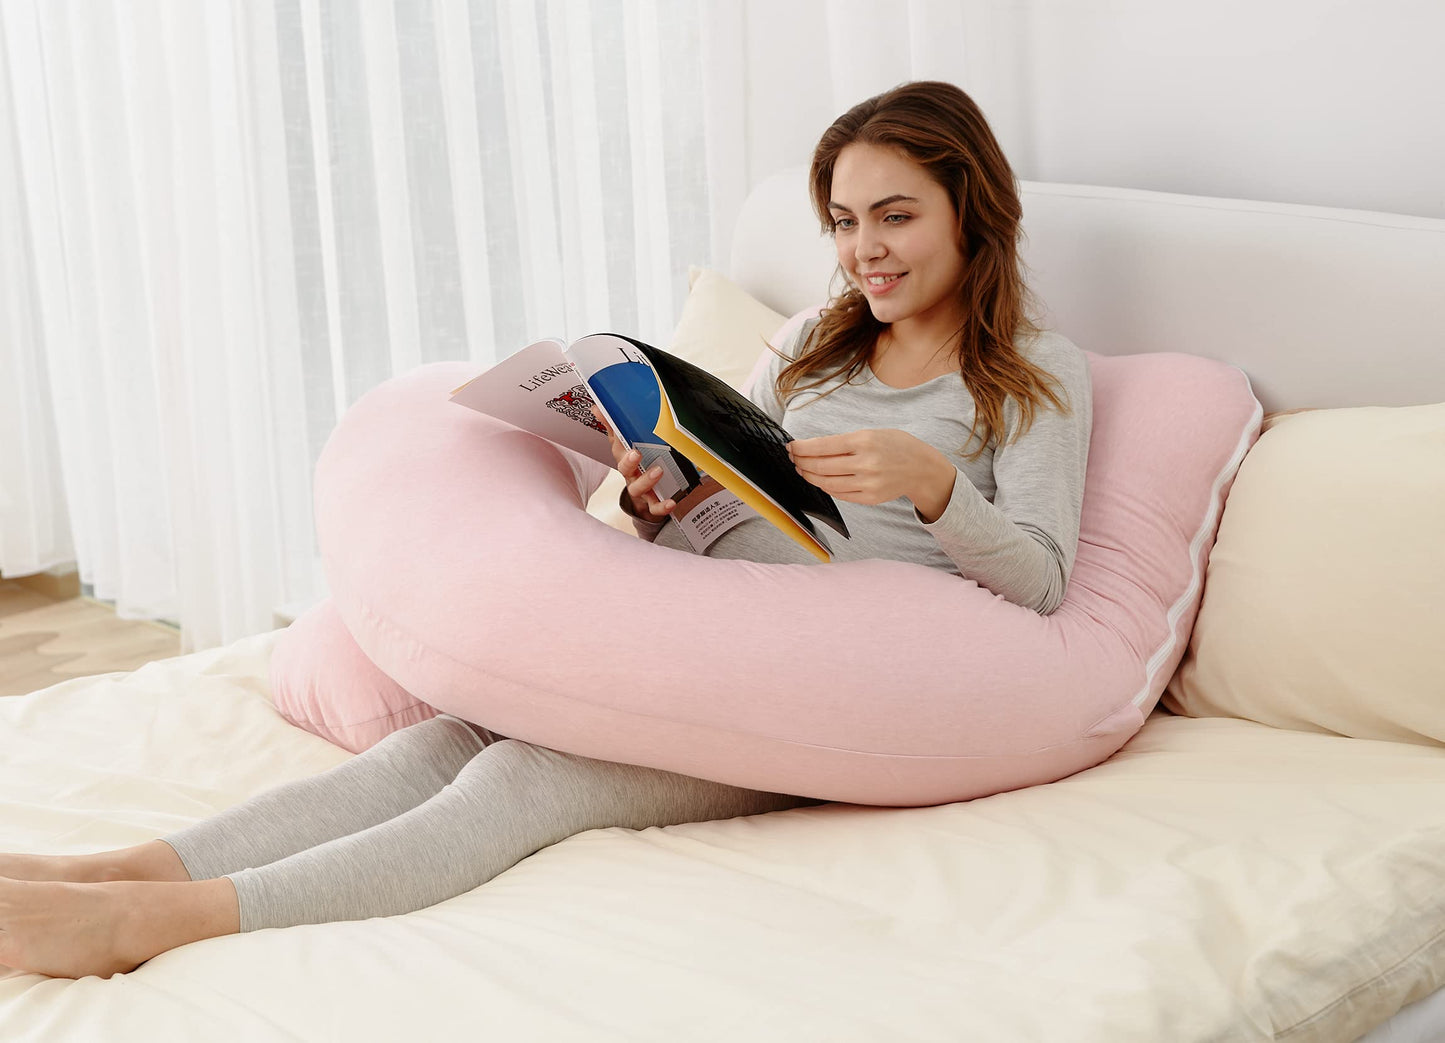 Momcozy Pregnancy Pillows for Sleeping, U Shaped Full Body Maternity Pillow for Side Sleeping - Support for Back, Legs, Belly, Hips, 57 Inch, Pink